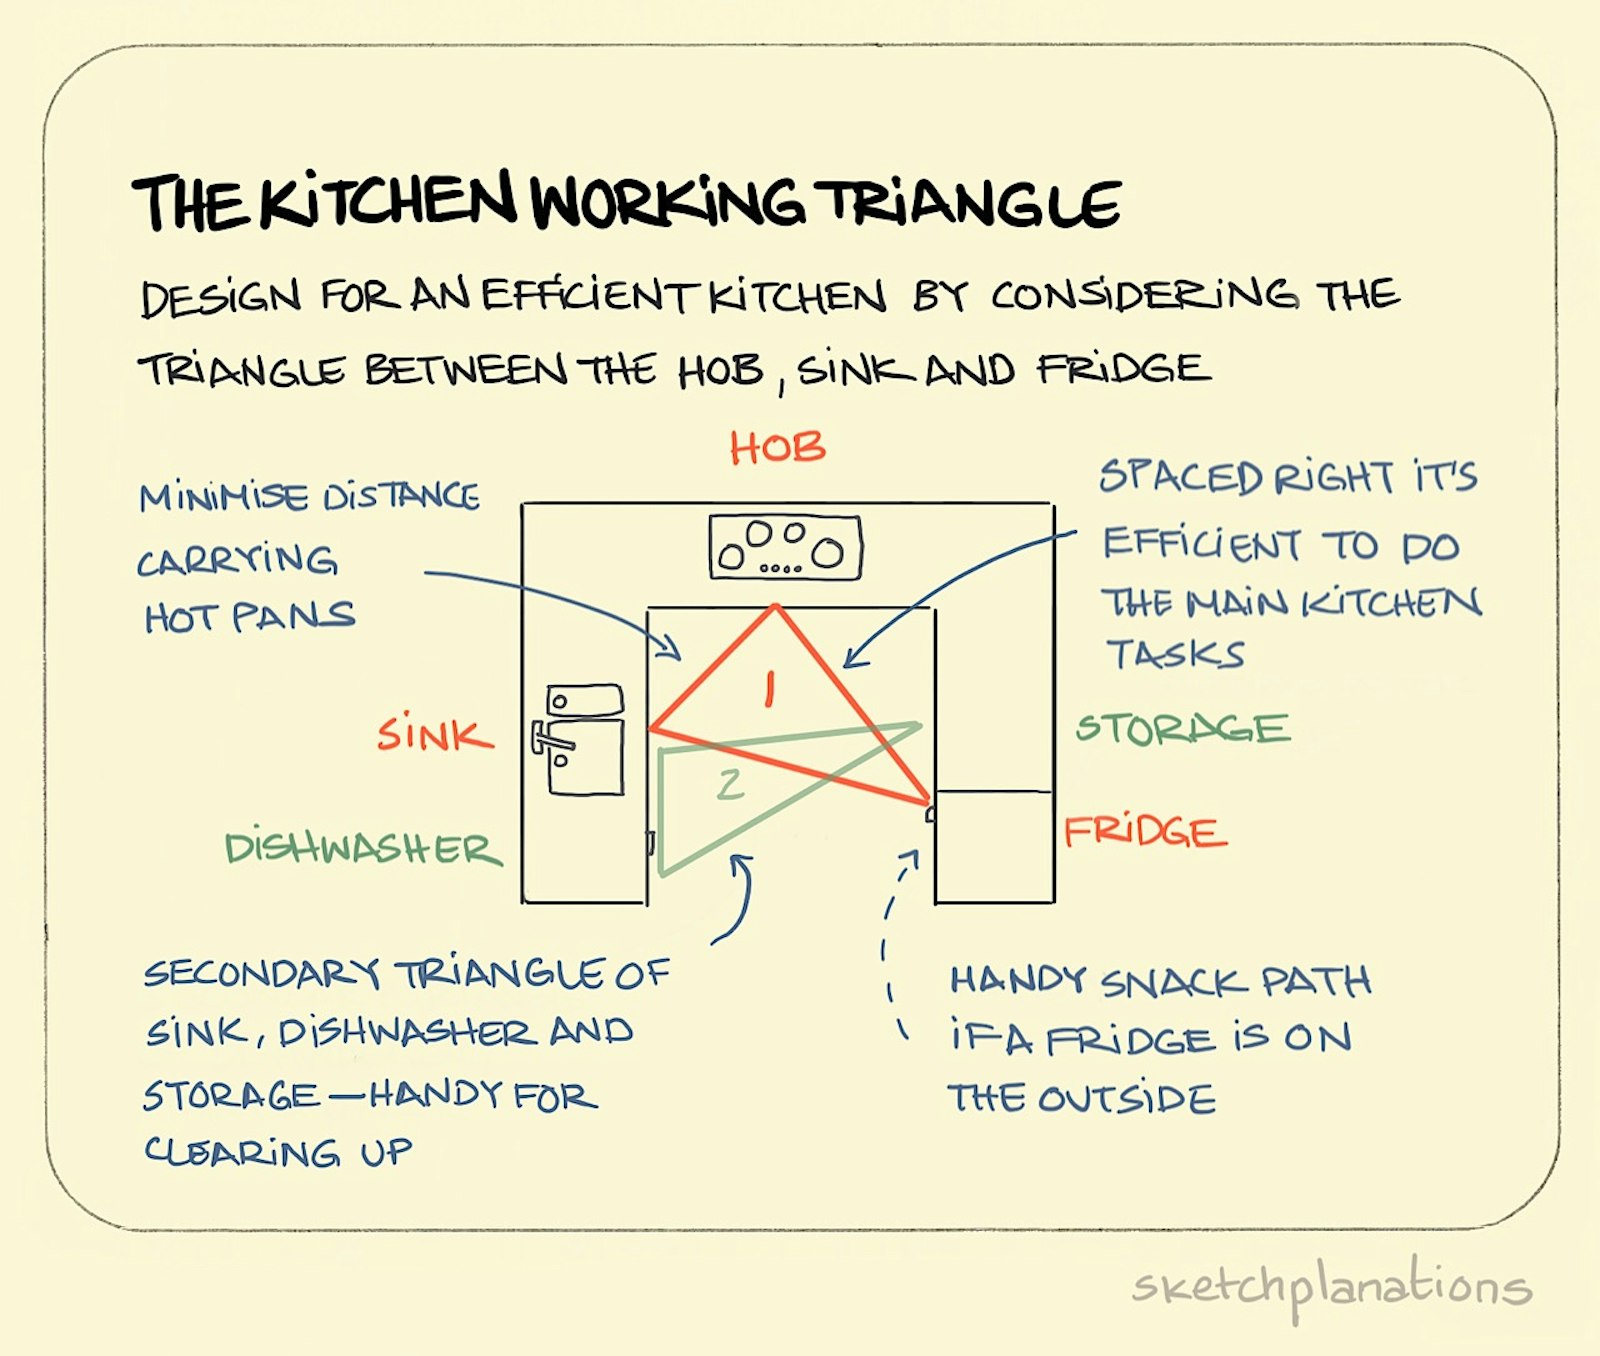 The kitchen working triangle   Sketchplanations